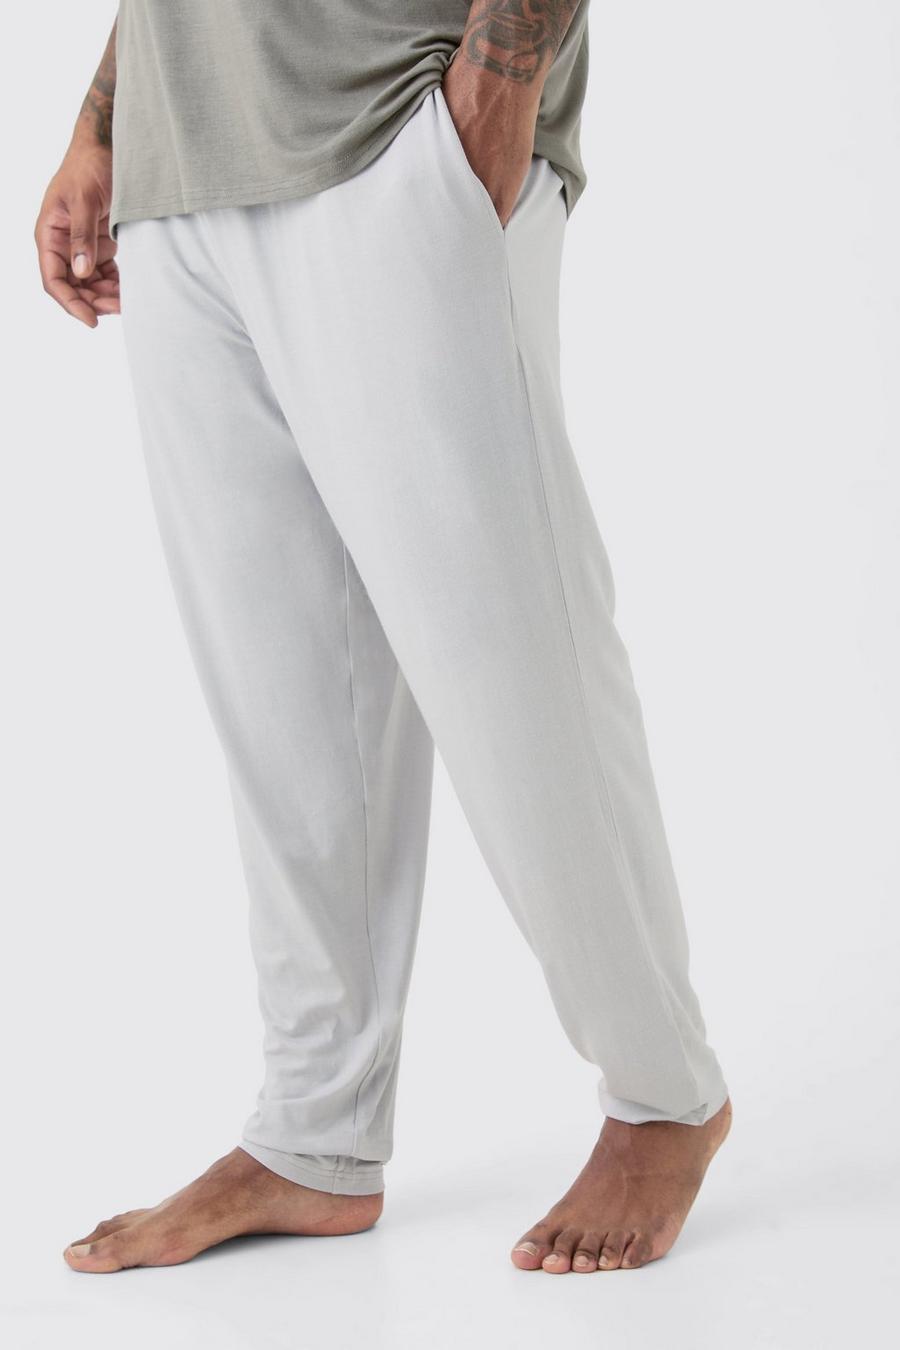 Ash grey Plus Premium Modal Mix Relaxed Fit Lounge Bottoms image number 1